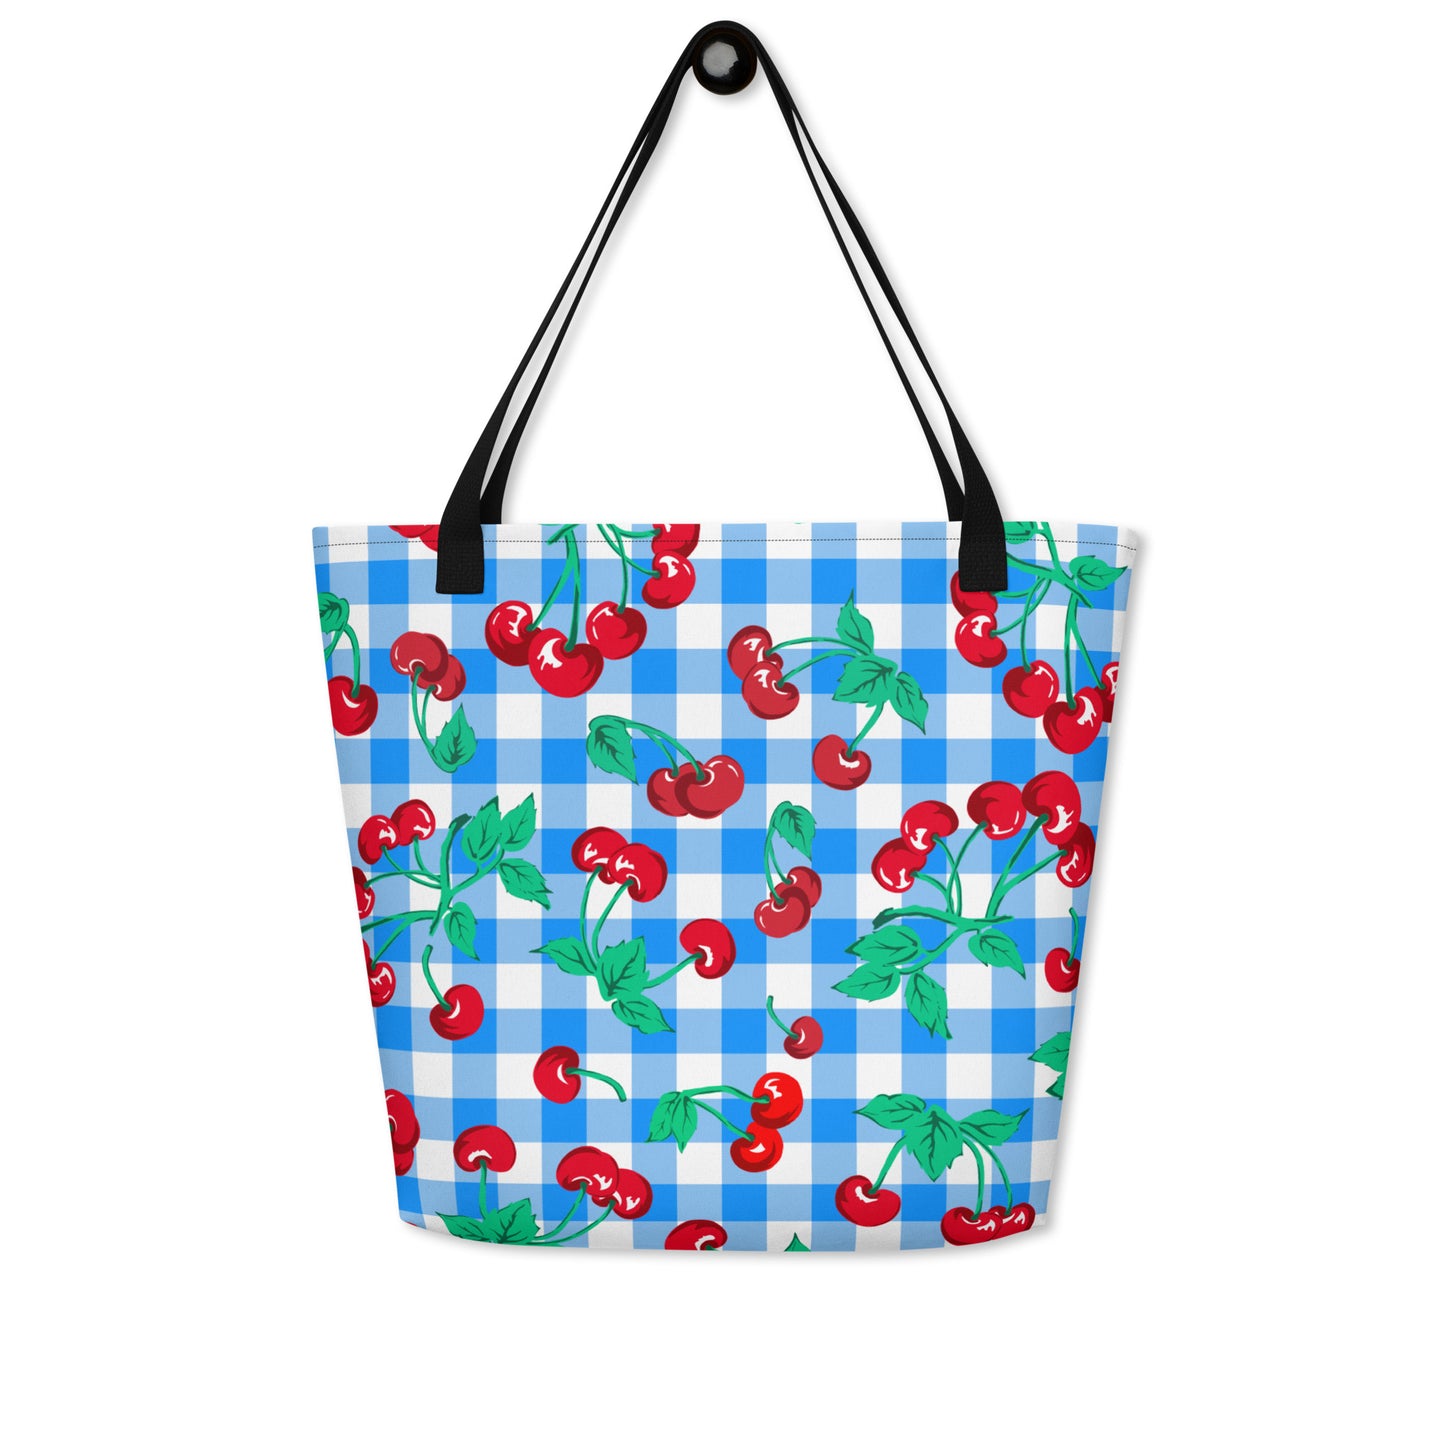 Bethany Cherry Girl Blue Gingham Print Oversized Tote Bag | Pinup Couture Relaxed